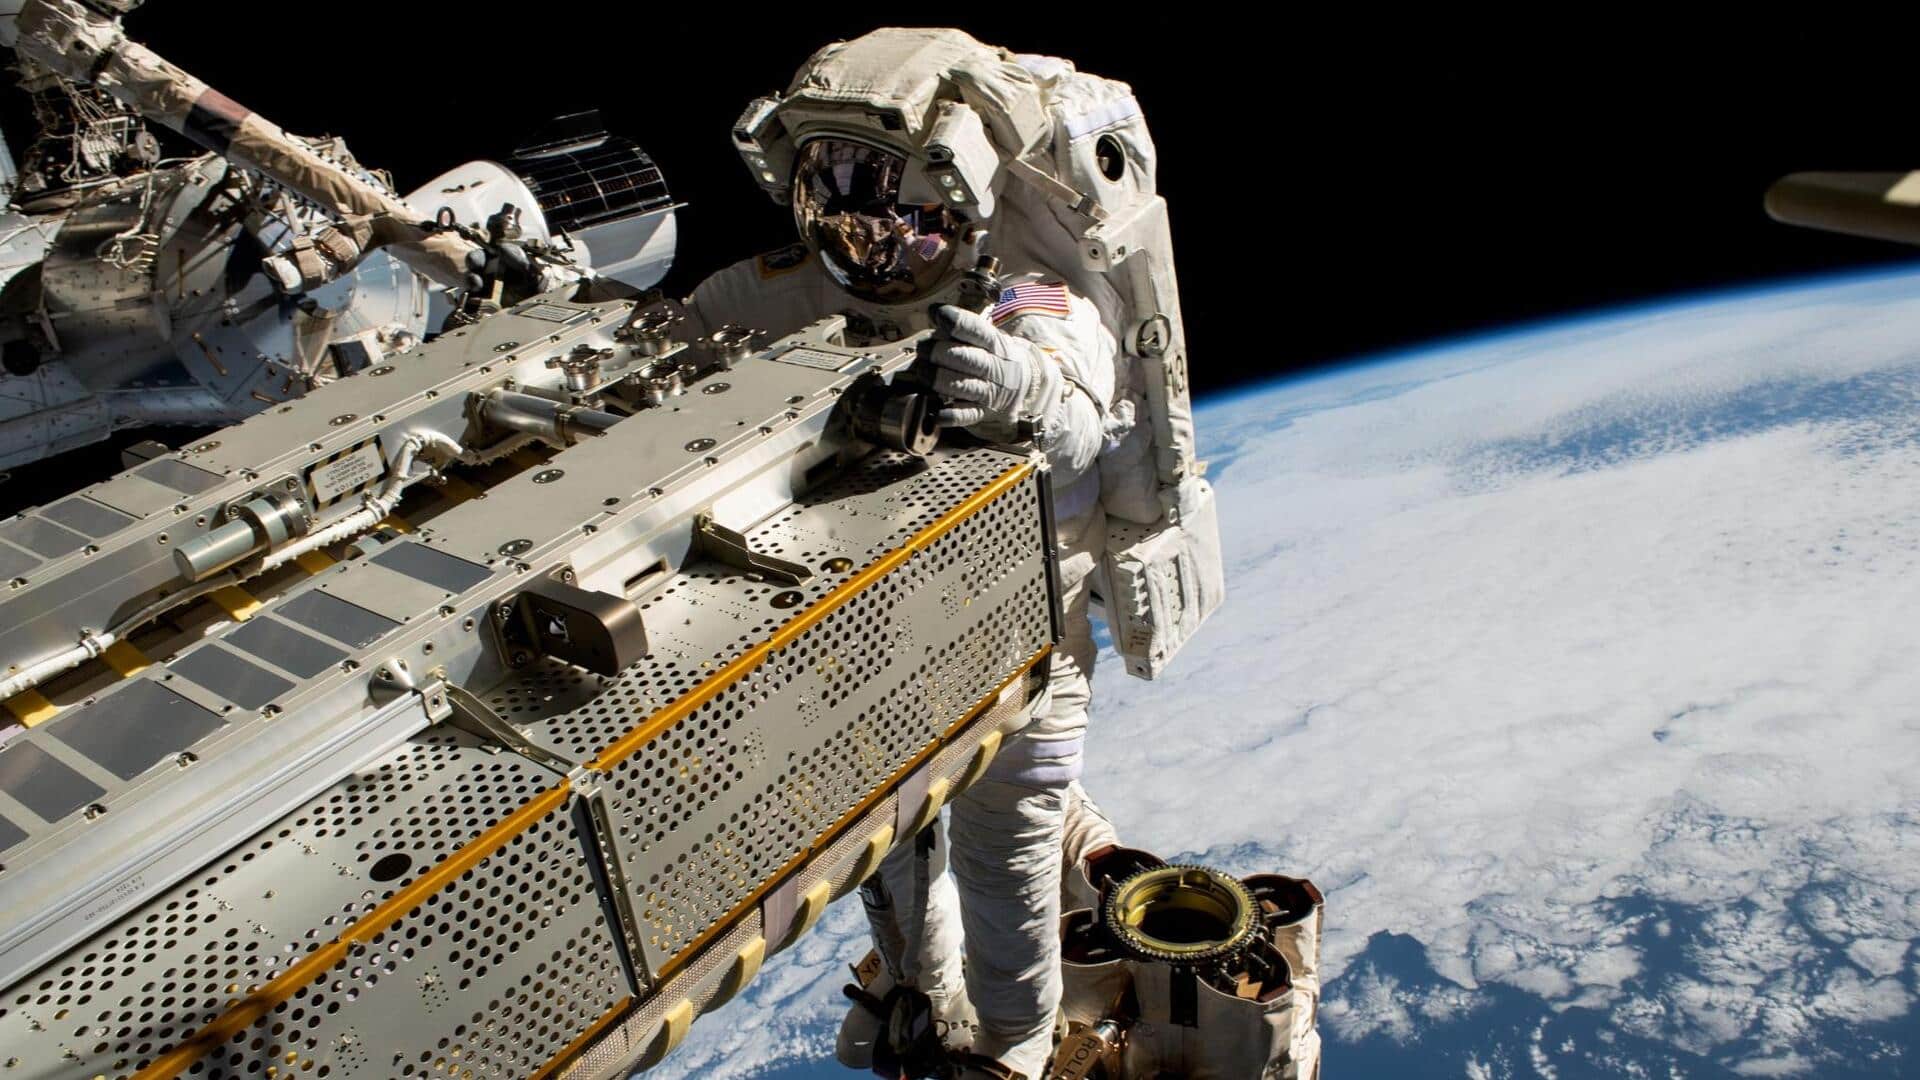 NASA astronauts to conduct all-female spacewalk today: How to watch